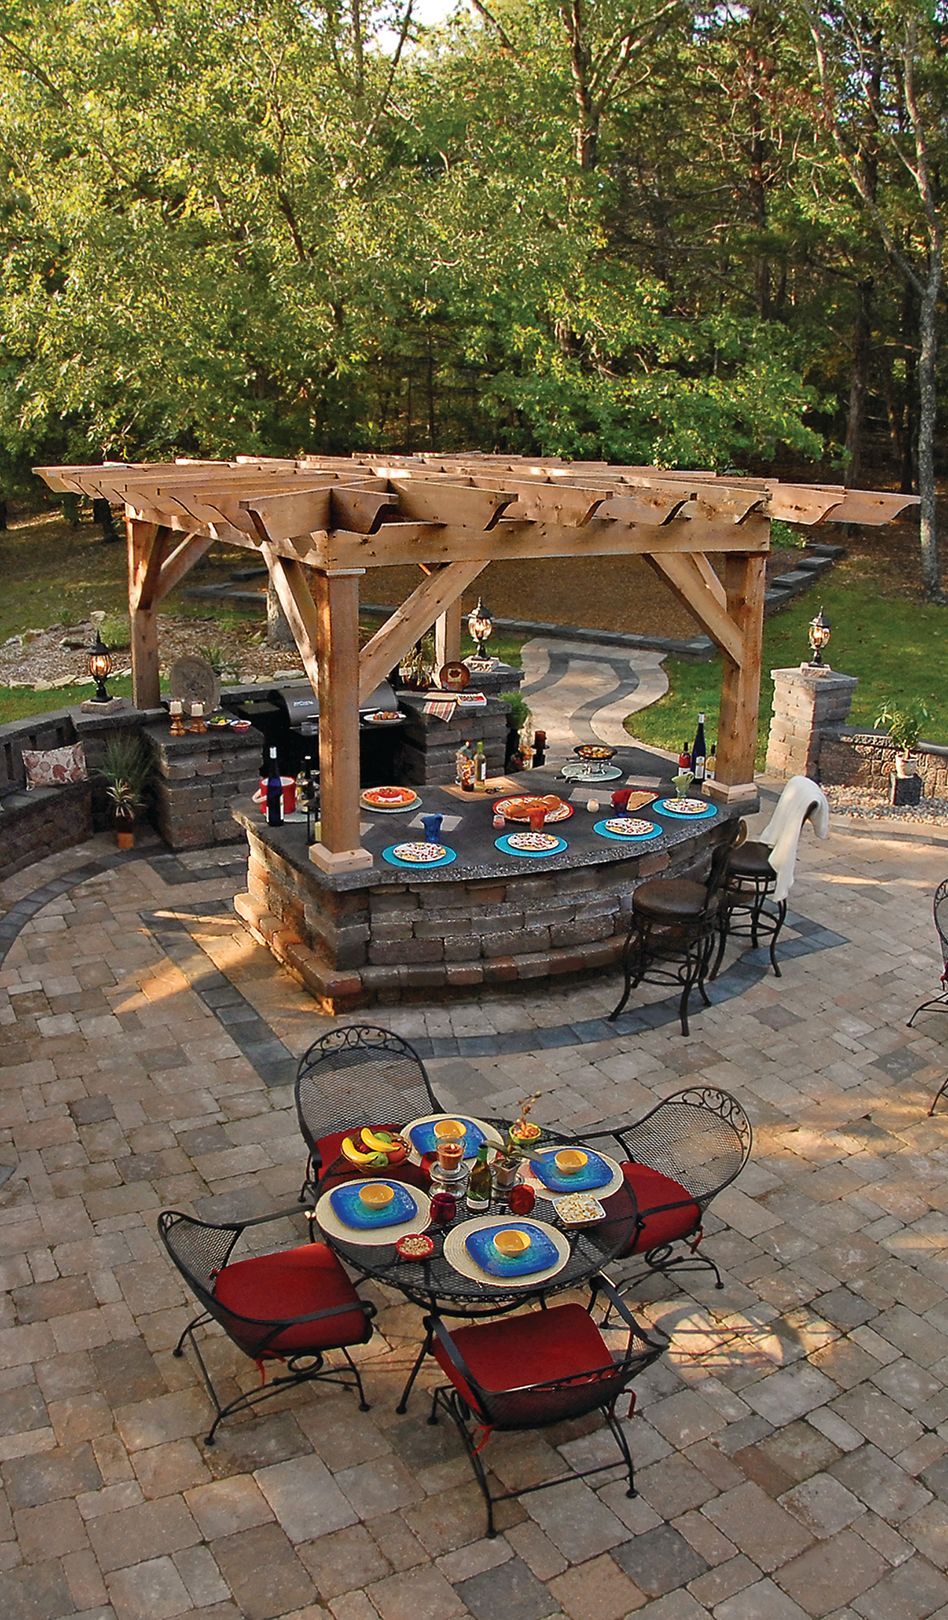 Elevate the Look of Your Patio or Walkway Using Canterbury Hill Pavers From Stockman Stoneworks.